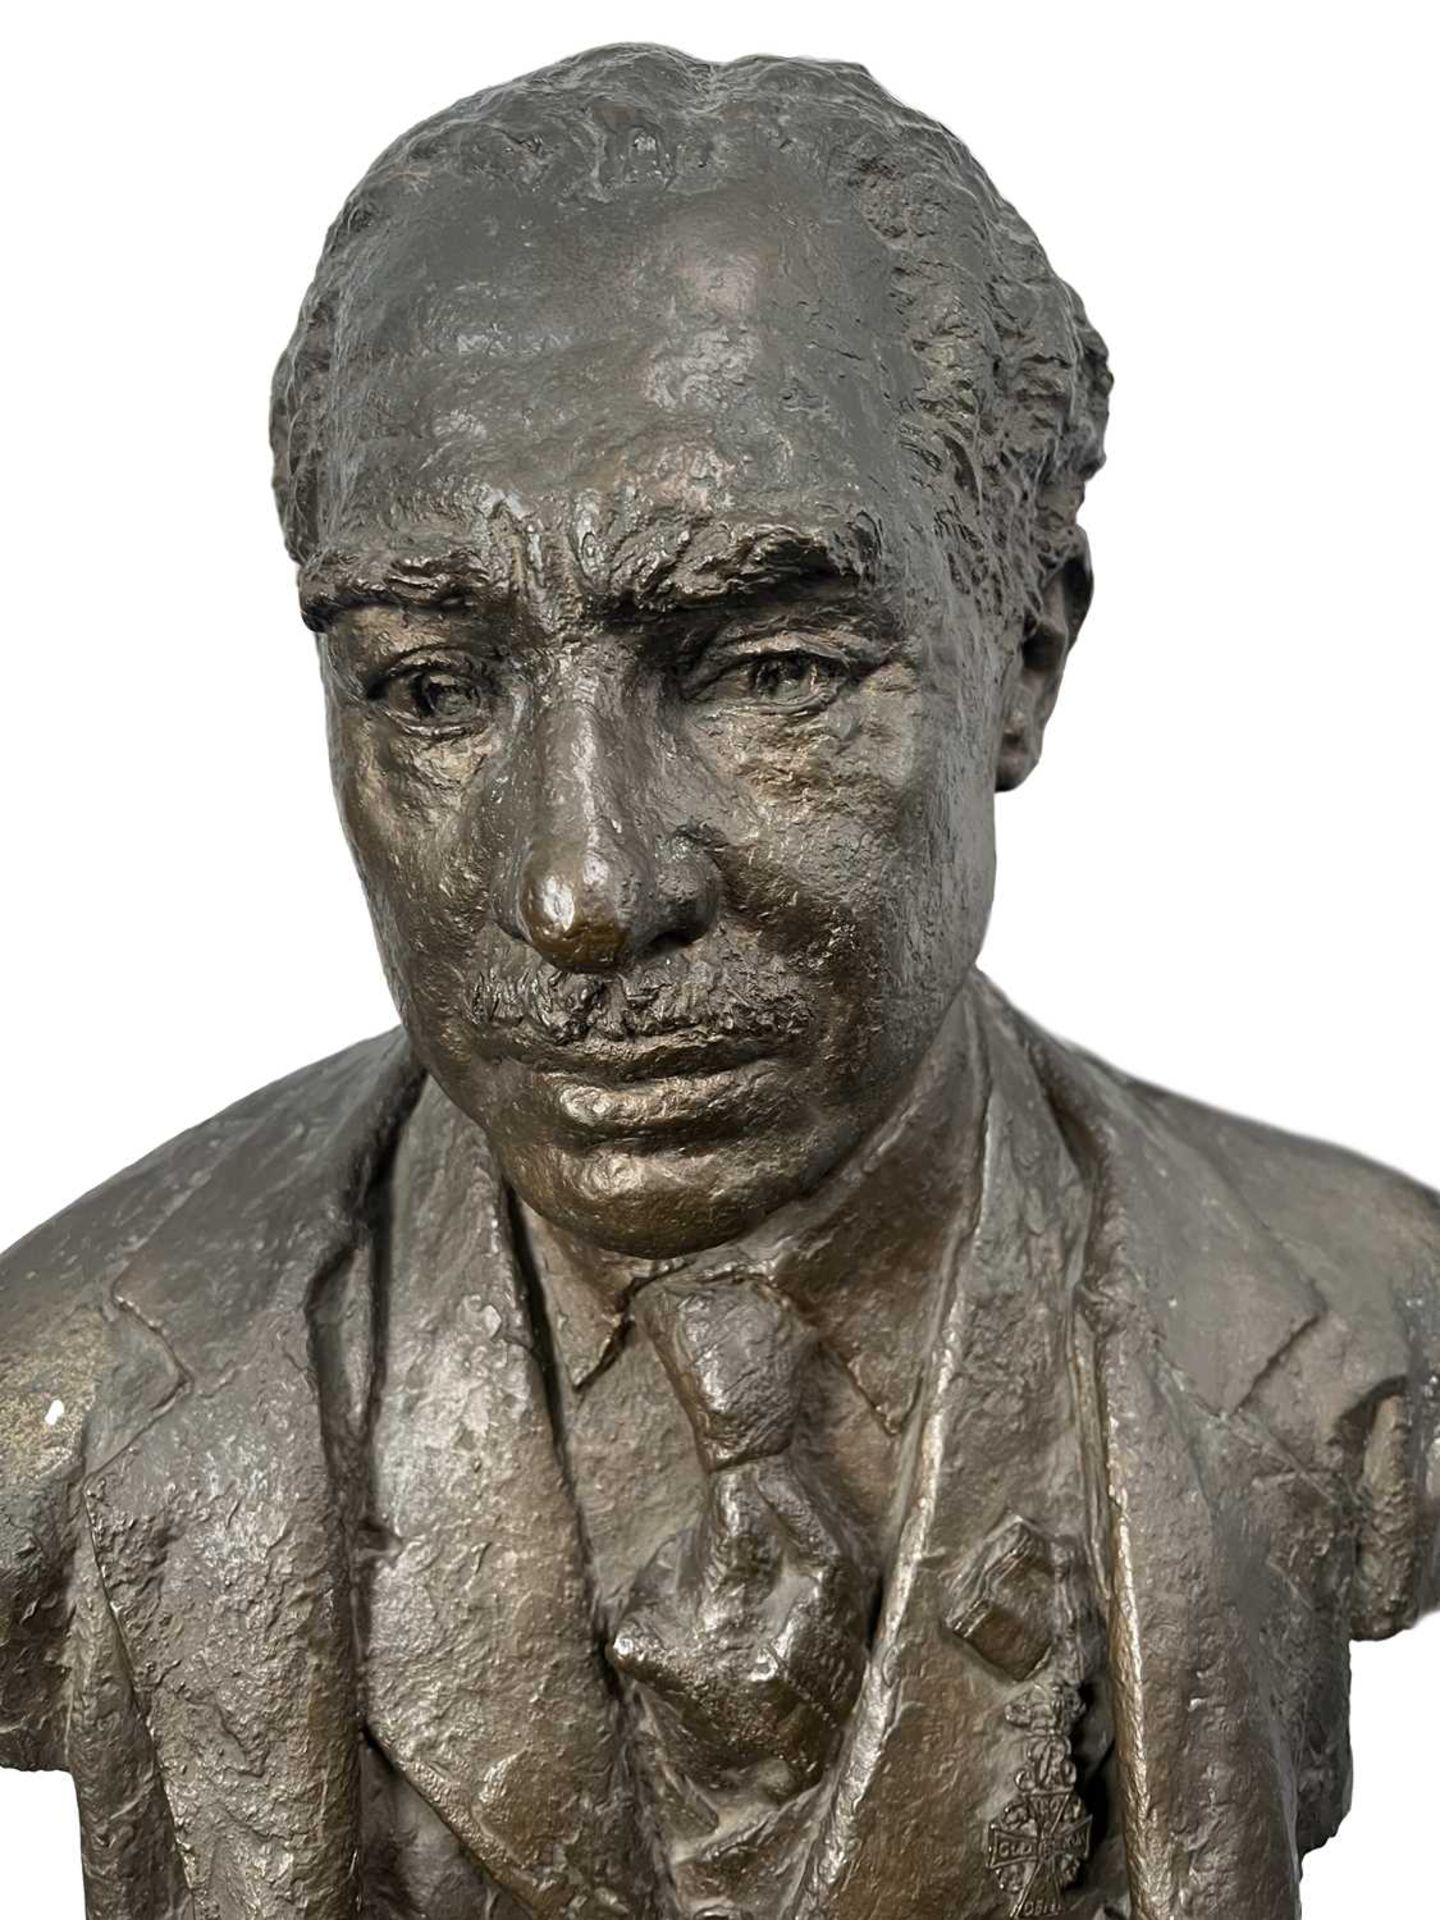 A 20TH CENTURY DANISH LIFE-SIZE BRONZE BUST OF A GENTLEMAN WITH MEDAL - Image 2 of 3